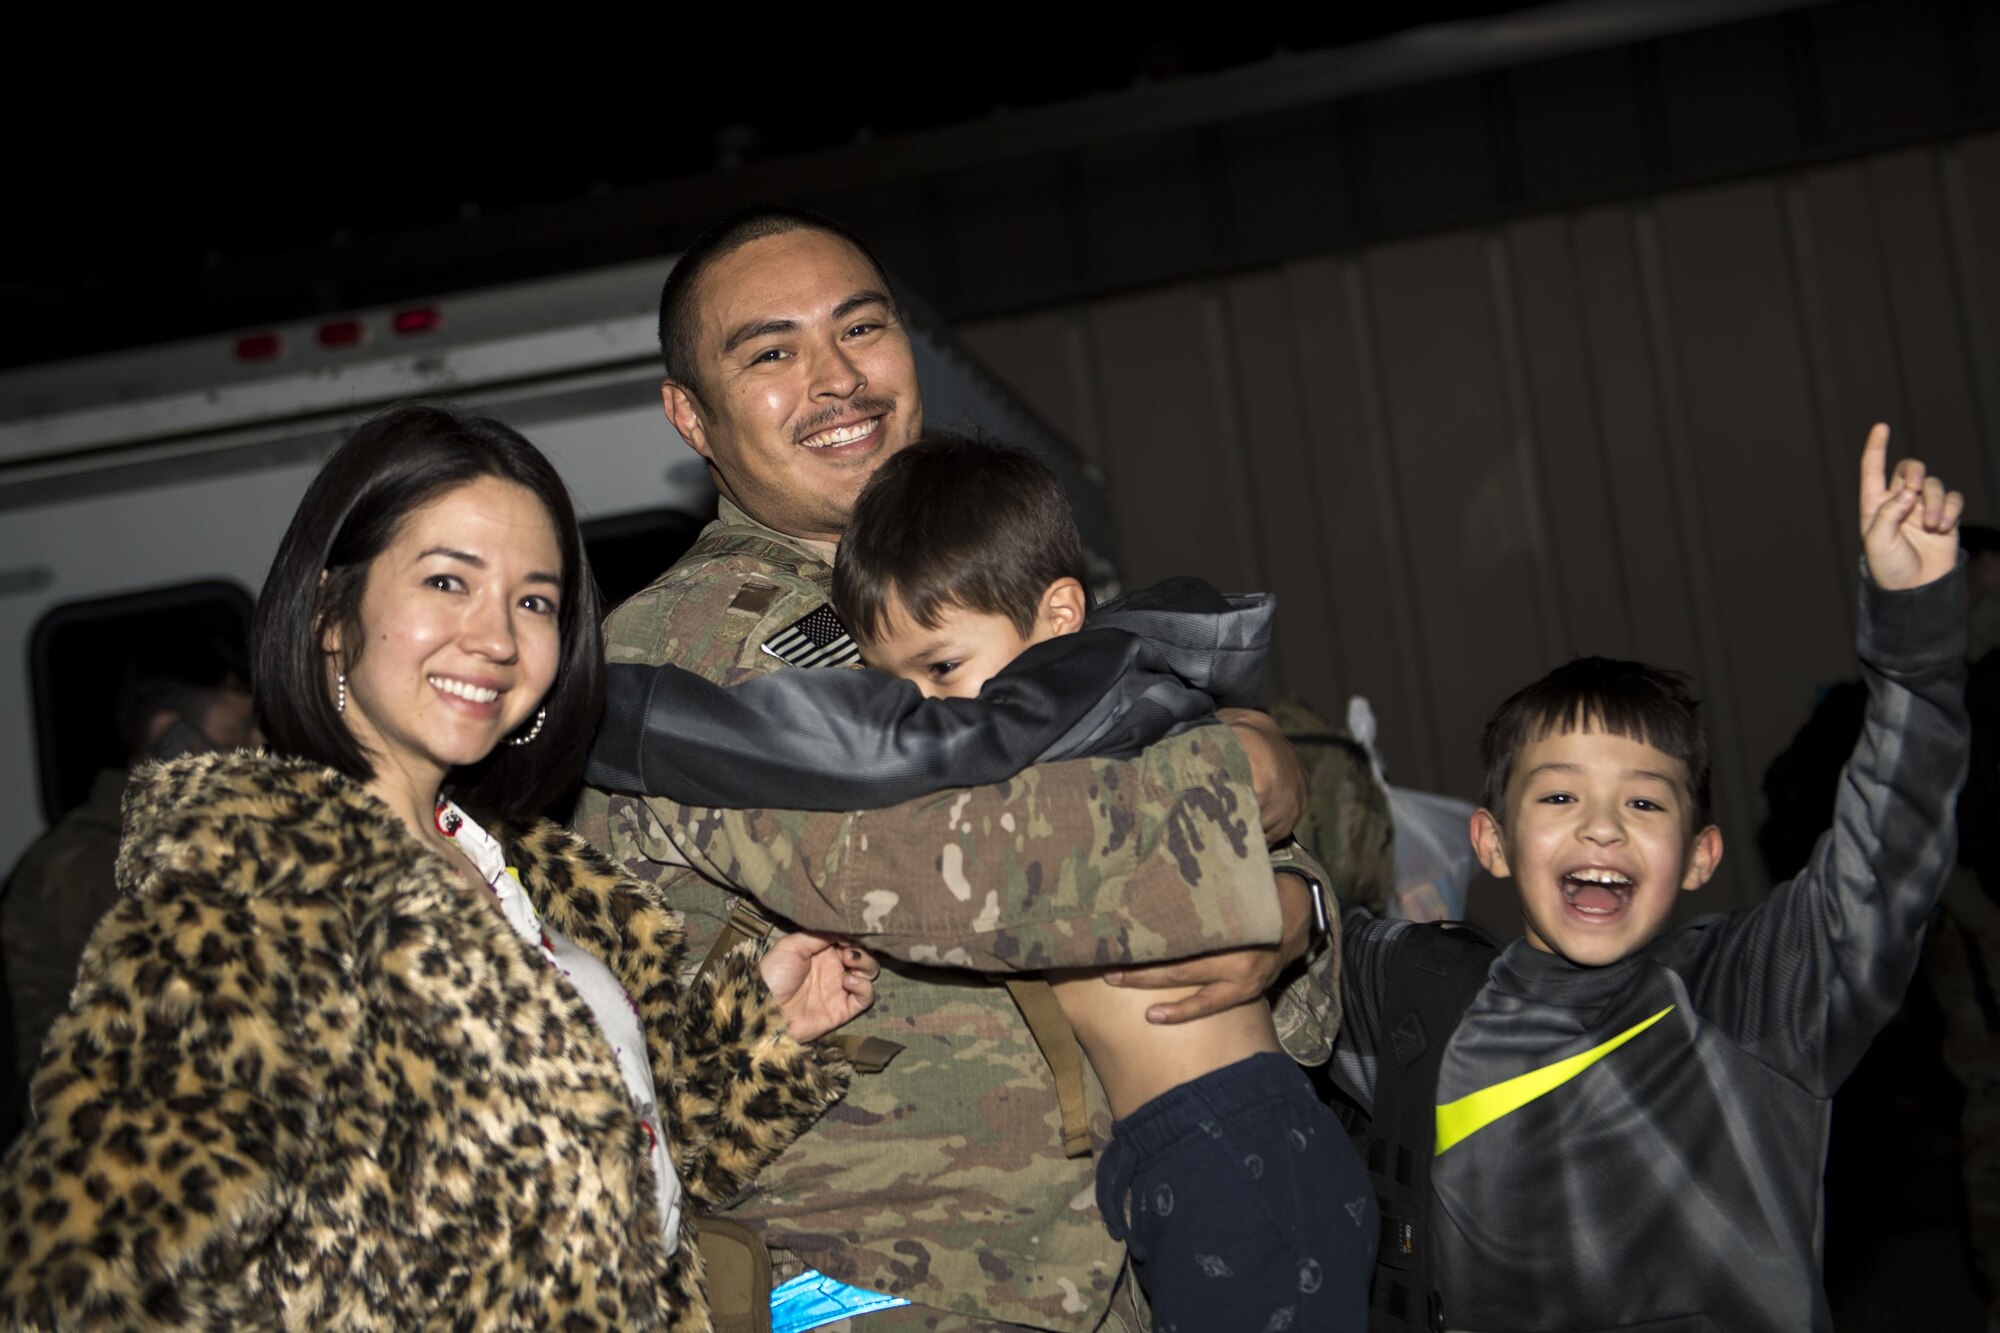 Master Sgt. Raynard Tsukiyama, 23d Aircraft Maintenance Squadron, poses for a photo with his family during a redeployment, Jan. 23, 2018, at Moody Air Force Base, Ga. Airmen from the 74th Fighter Squadron and 23d Maintenance Group returned home after a seven-month deployment in support of Operation Inherent Resolve. (U.S. Air Force photo by Senior Airman Daniel Snider)